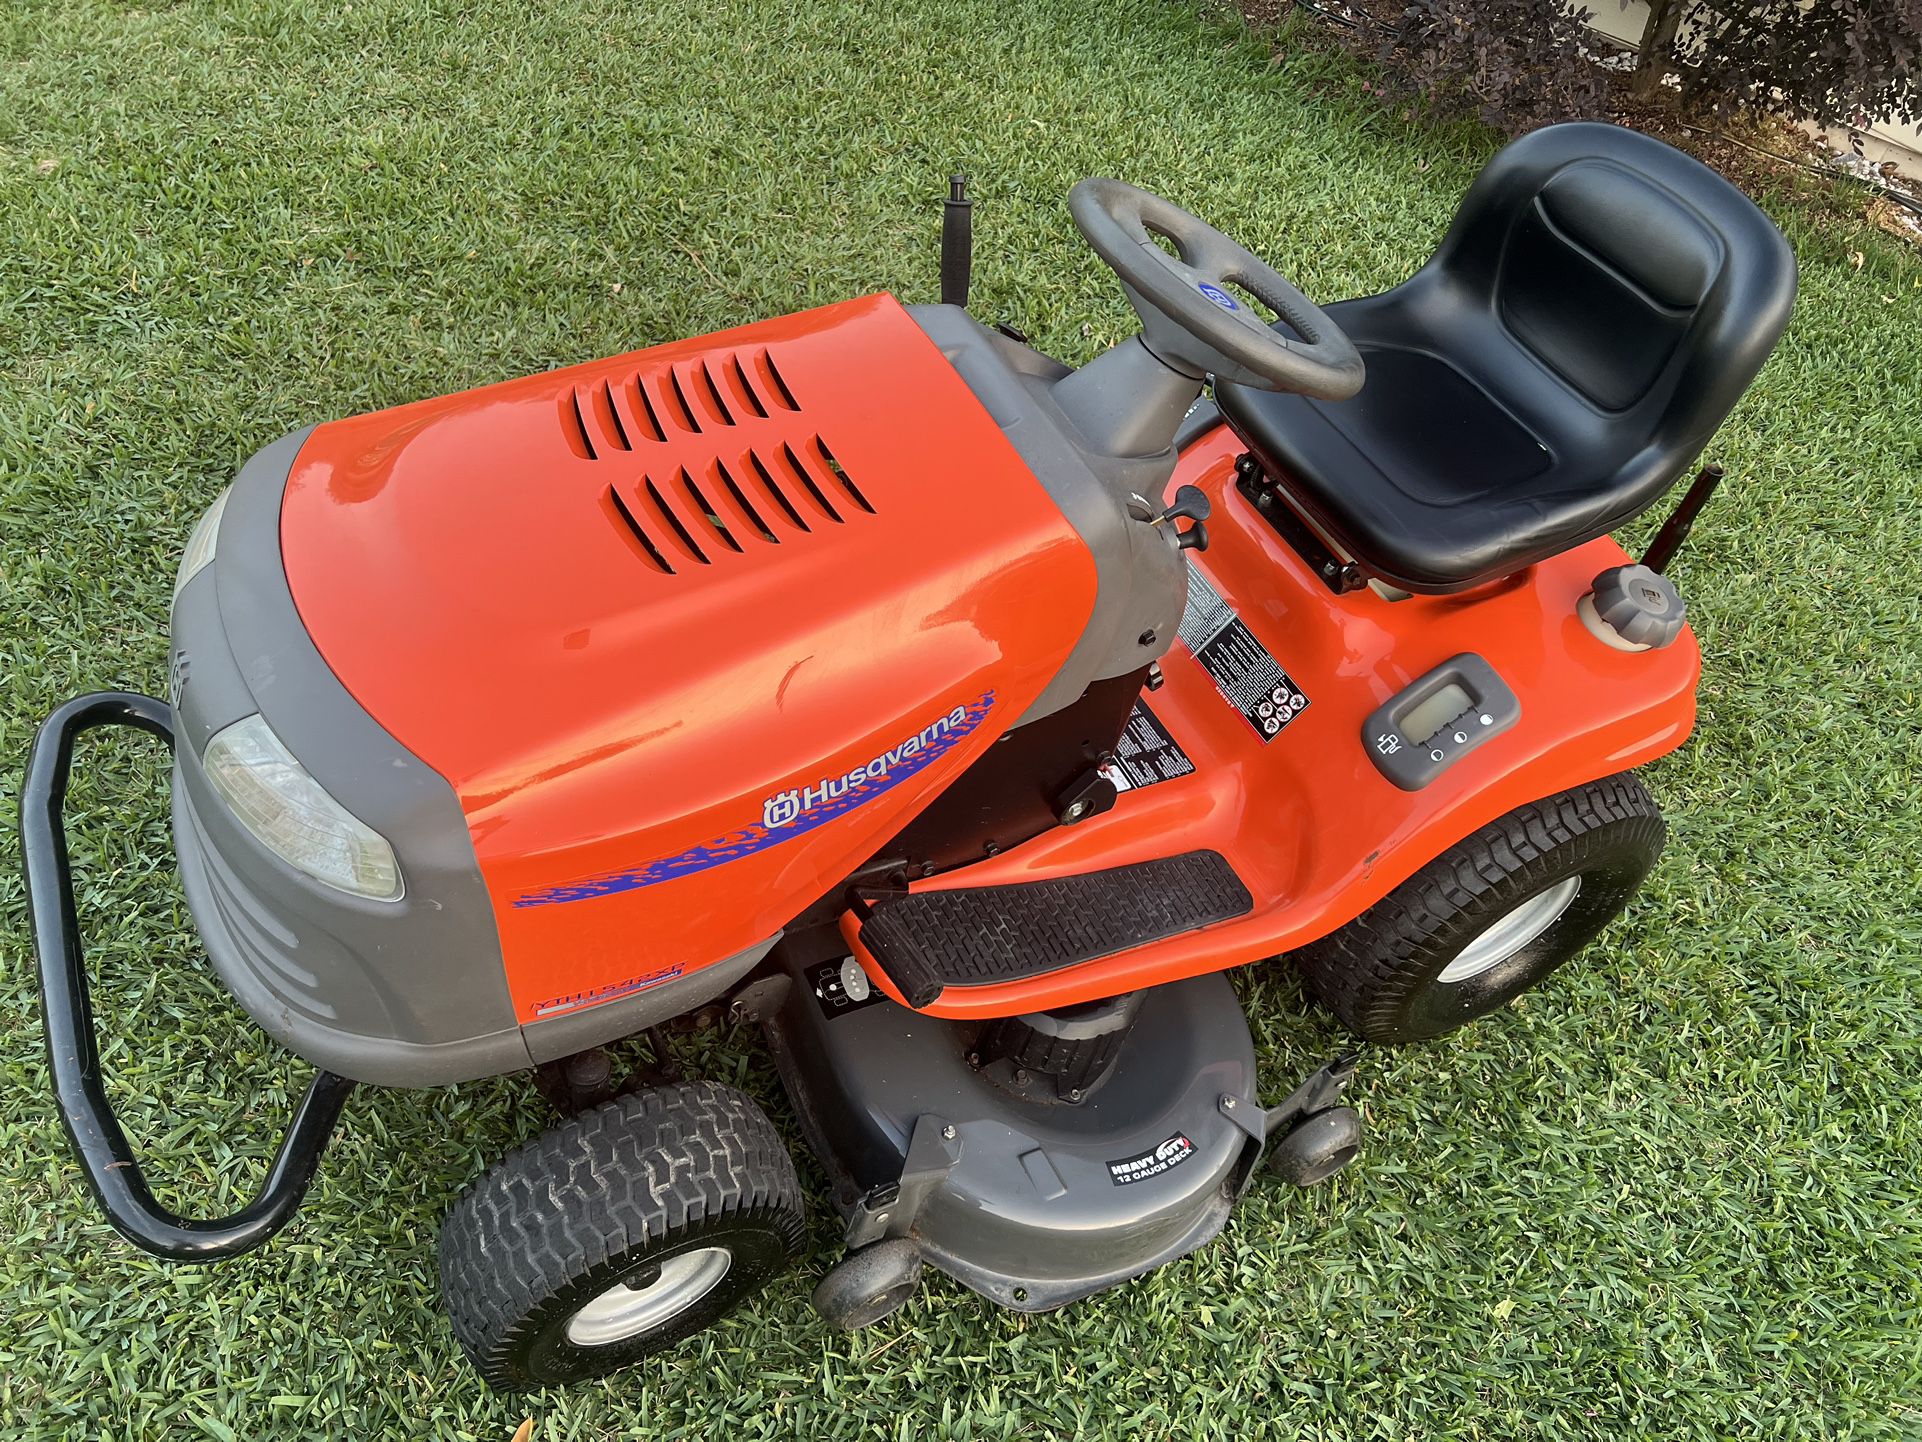 Riding Mower Runs Great Mint Condition Fully Serviced 